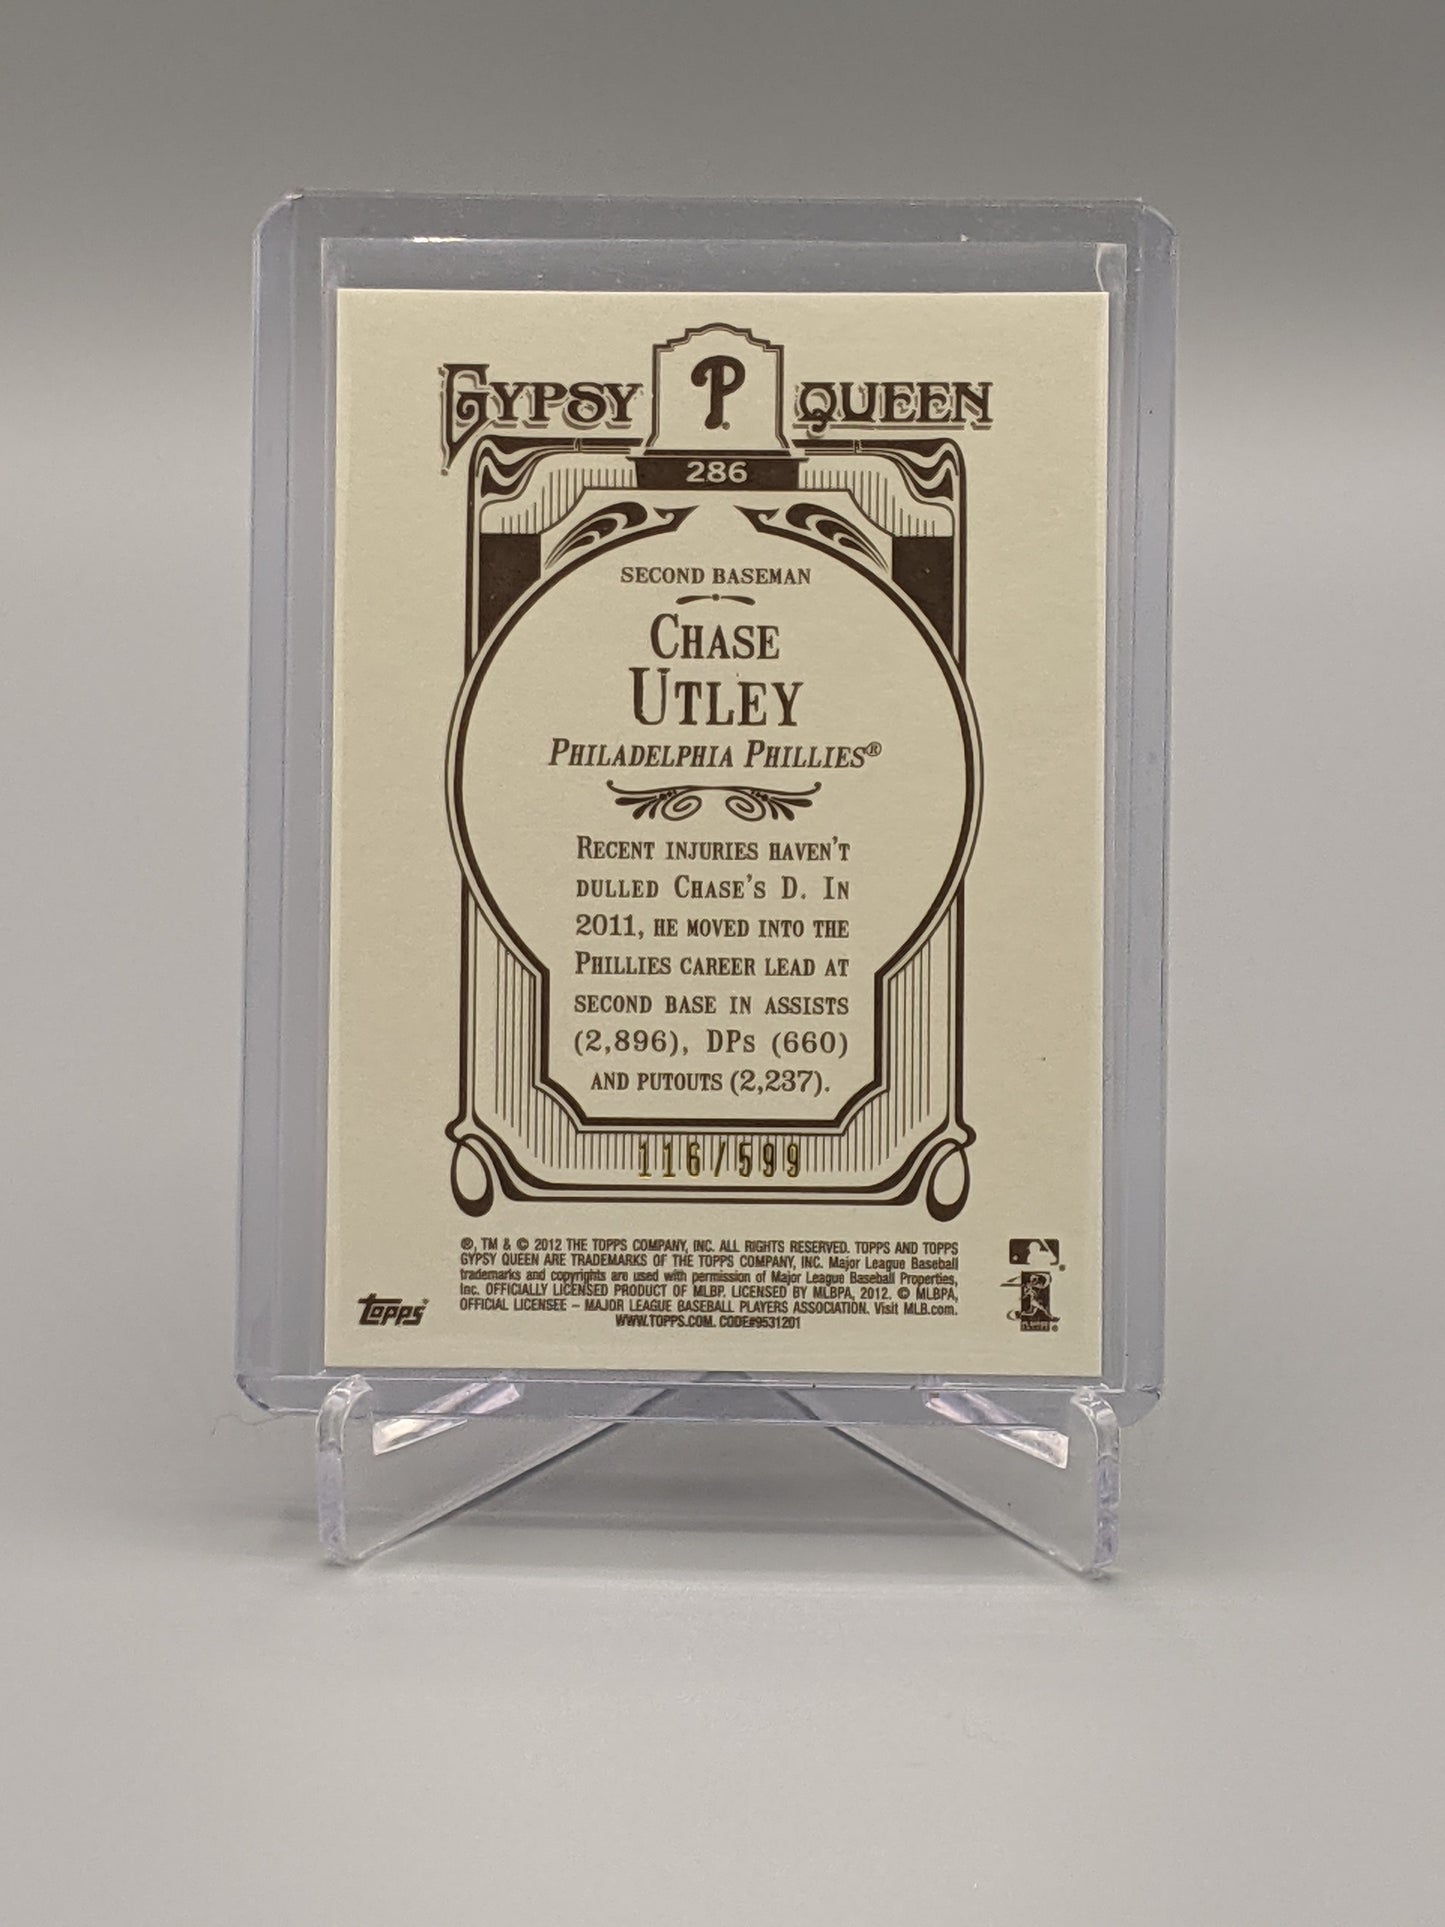 2012 Topps Gypsy Queen Blue Framed Chase Utley Phillies